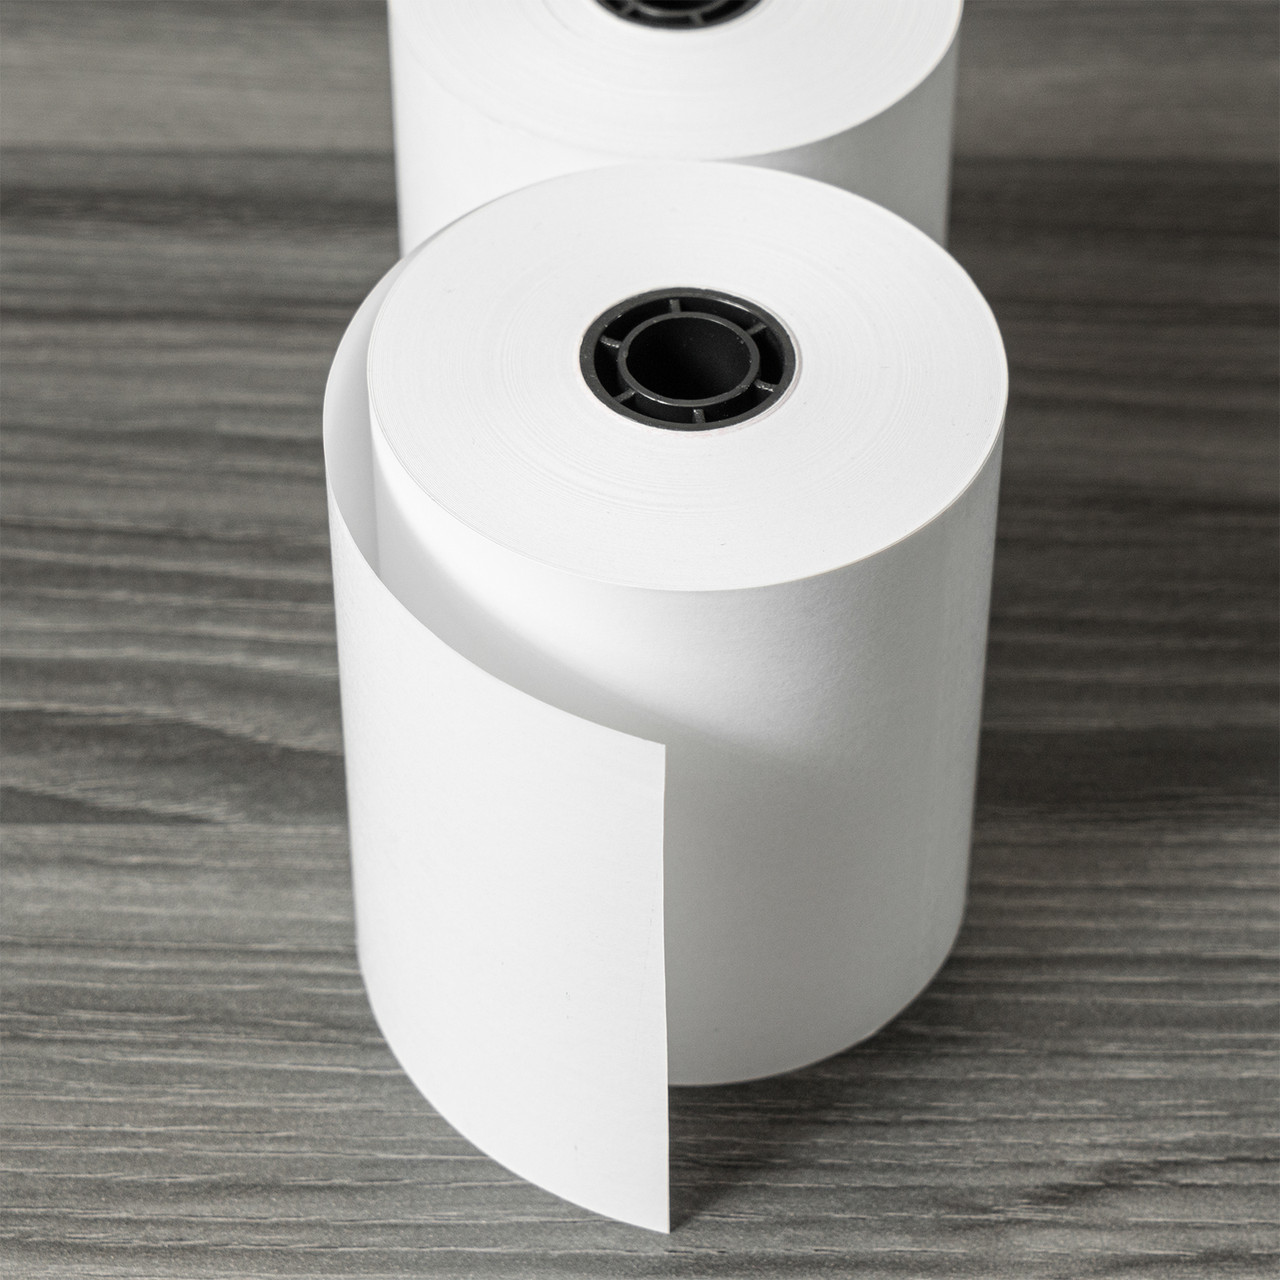 Storing Tips To Keep Thermal Paper Safe - Telemark